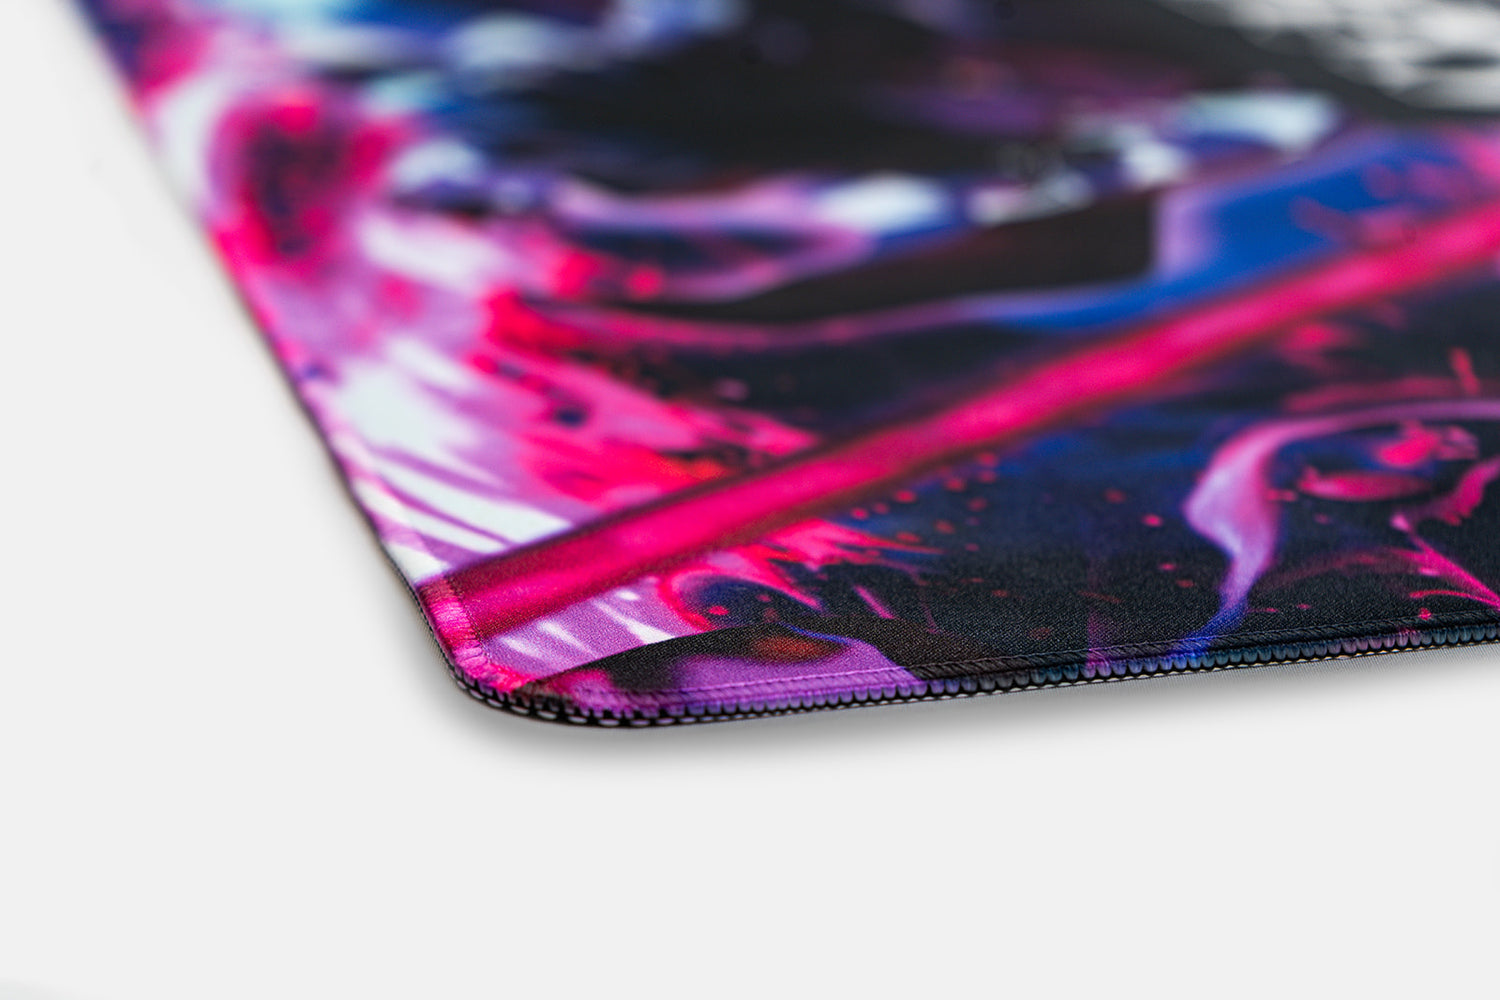 Close up of stitched edge of mouse pad